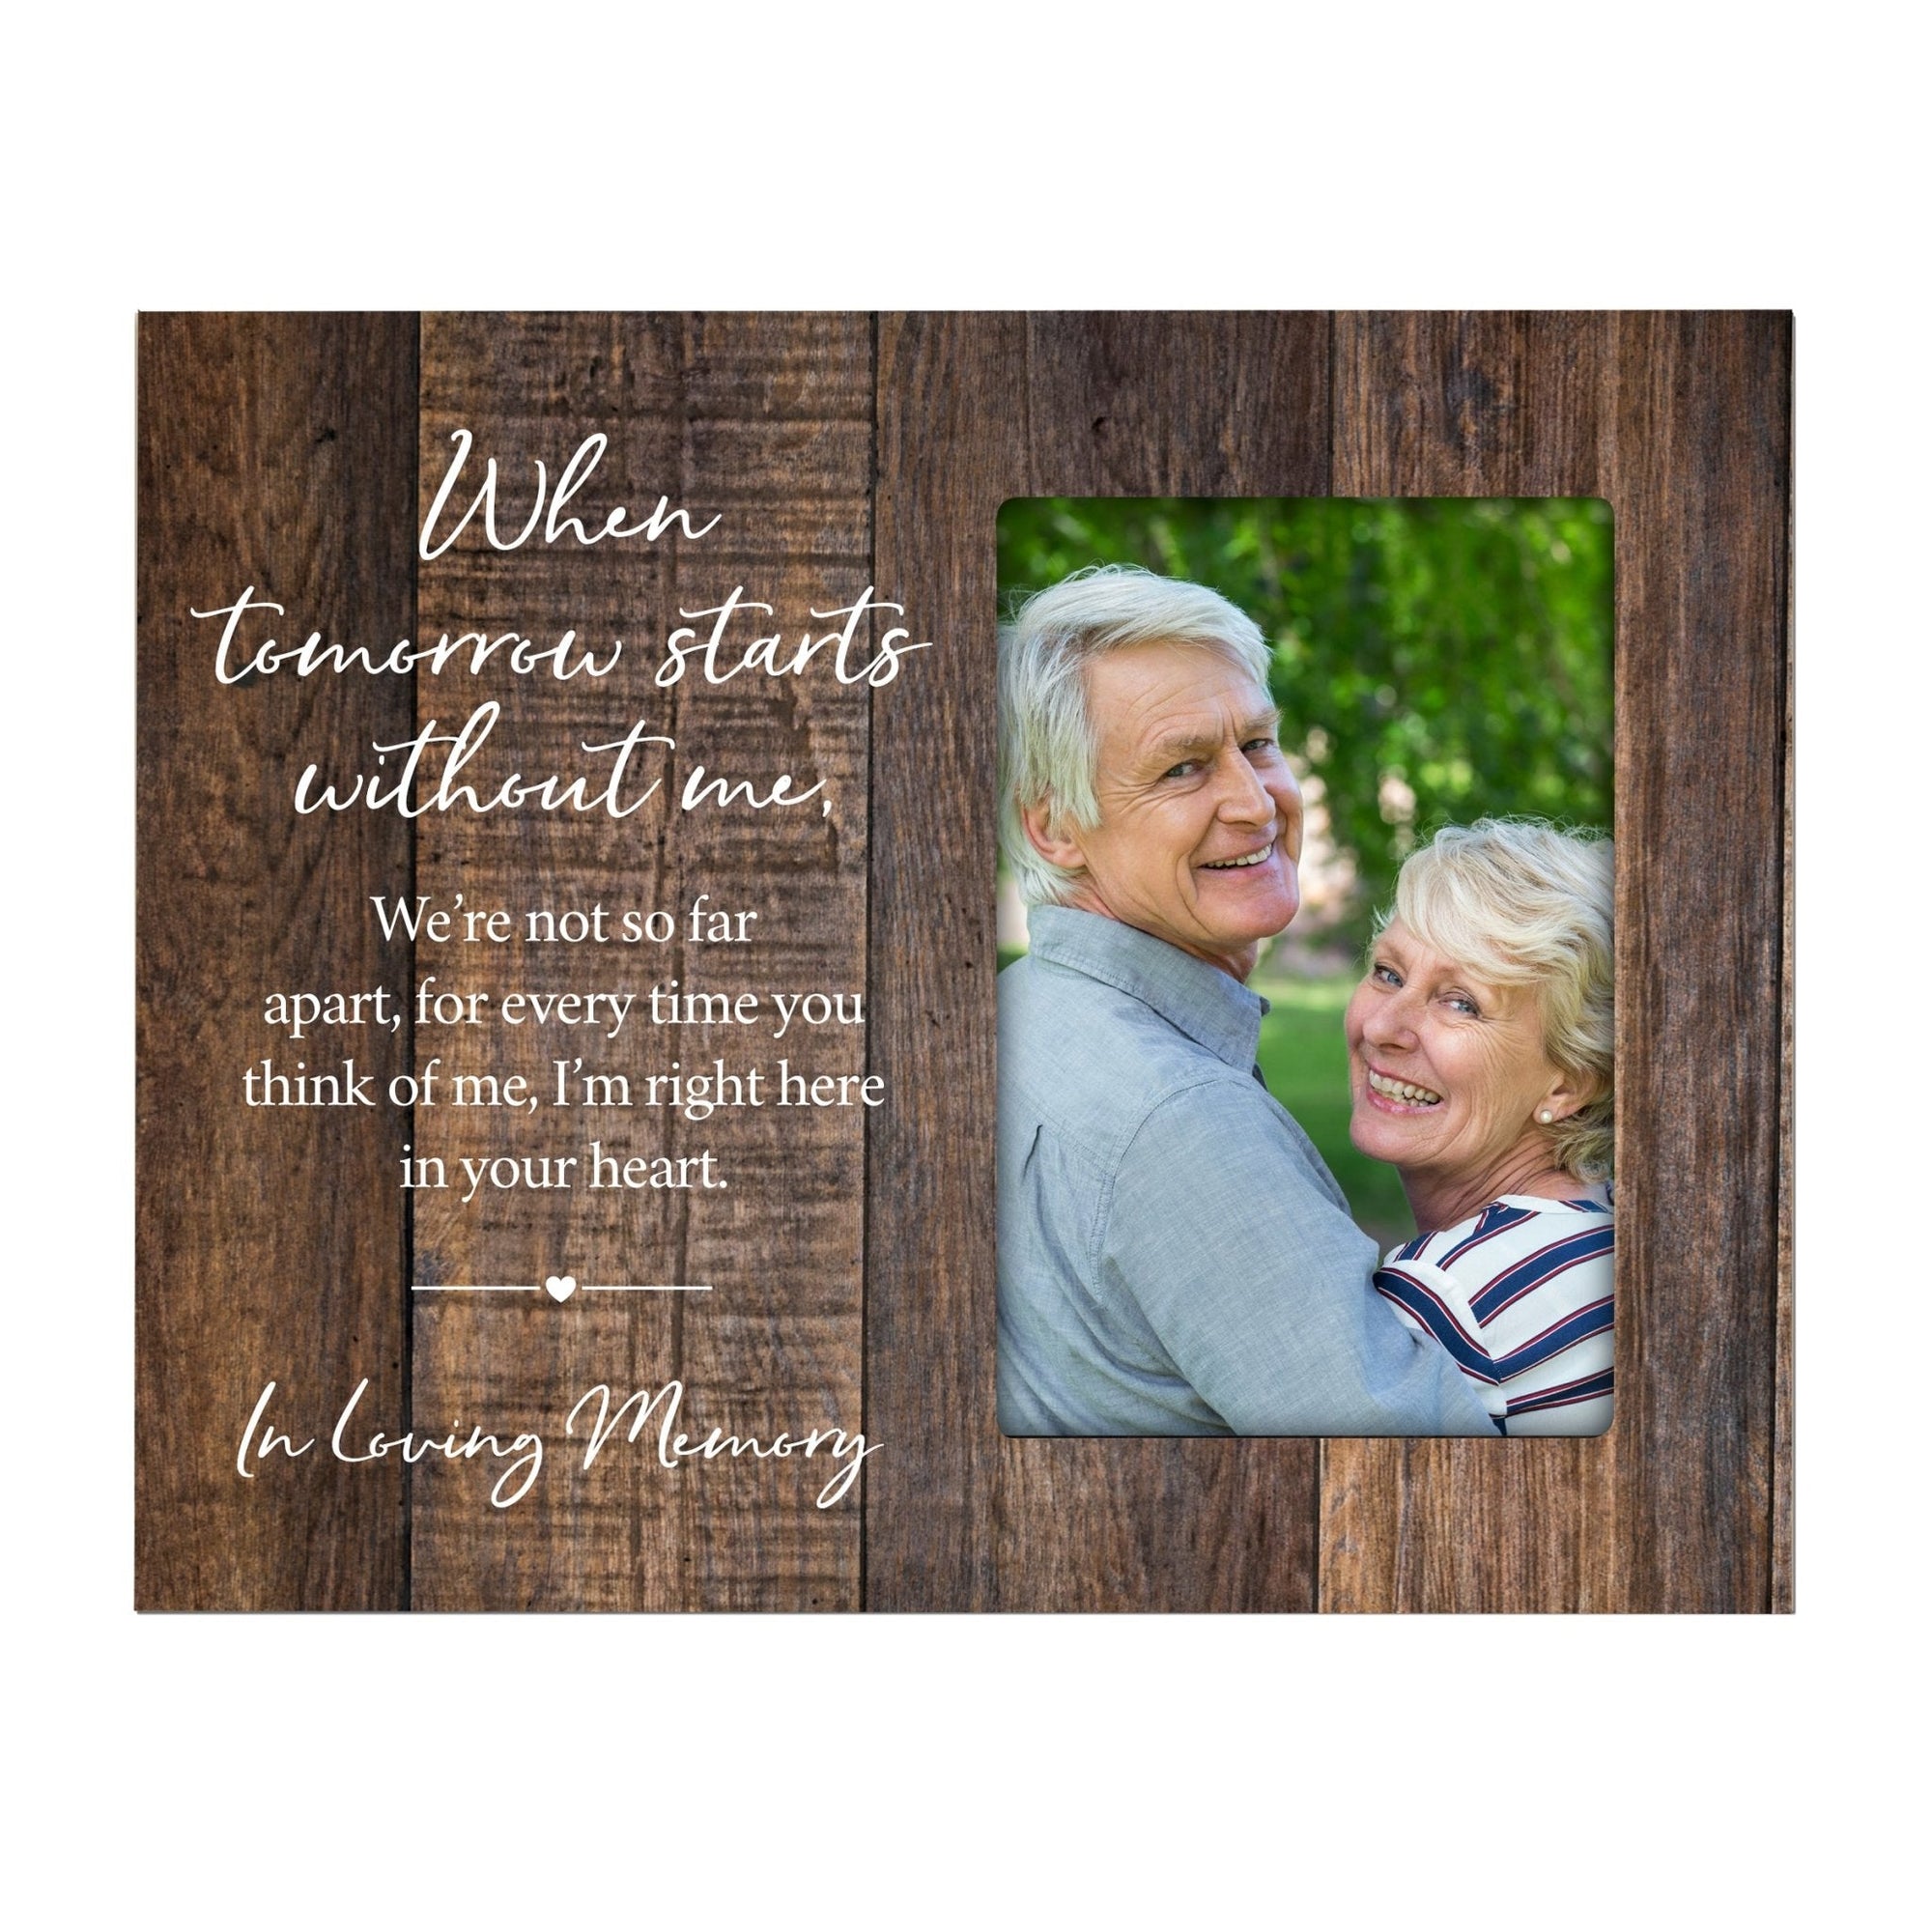 Modern Horizontal 8x10 Wooden Memorial Picture Frame Holds 4x6 Photo Home Decoration Gift Idea - When Tomorrow Start Without - Memorial Theme - LifeSong Milestones